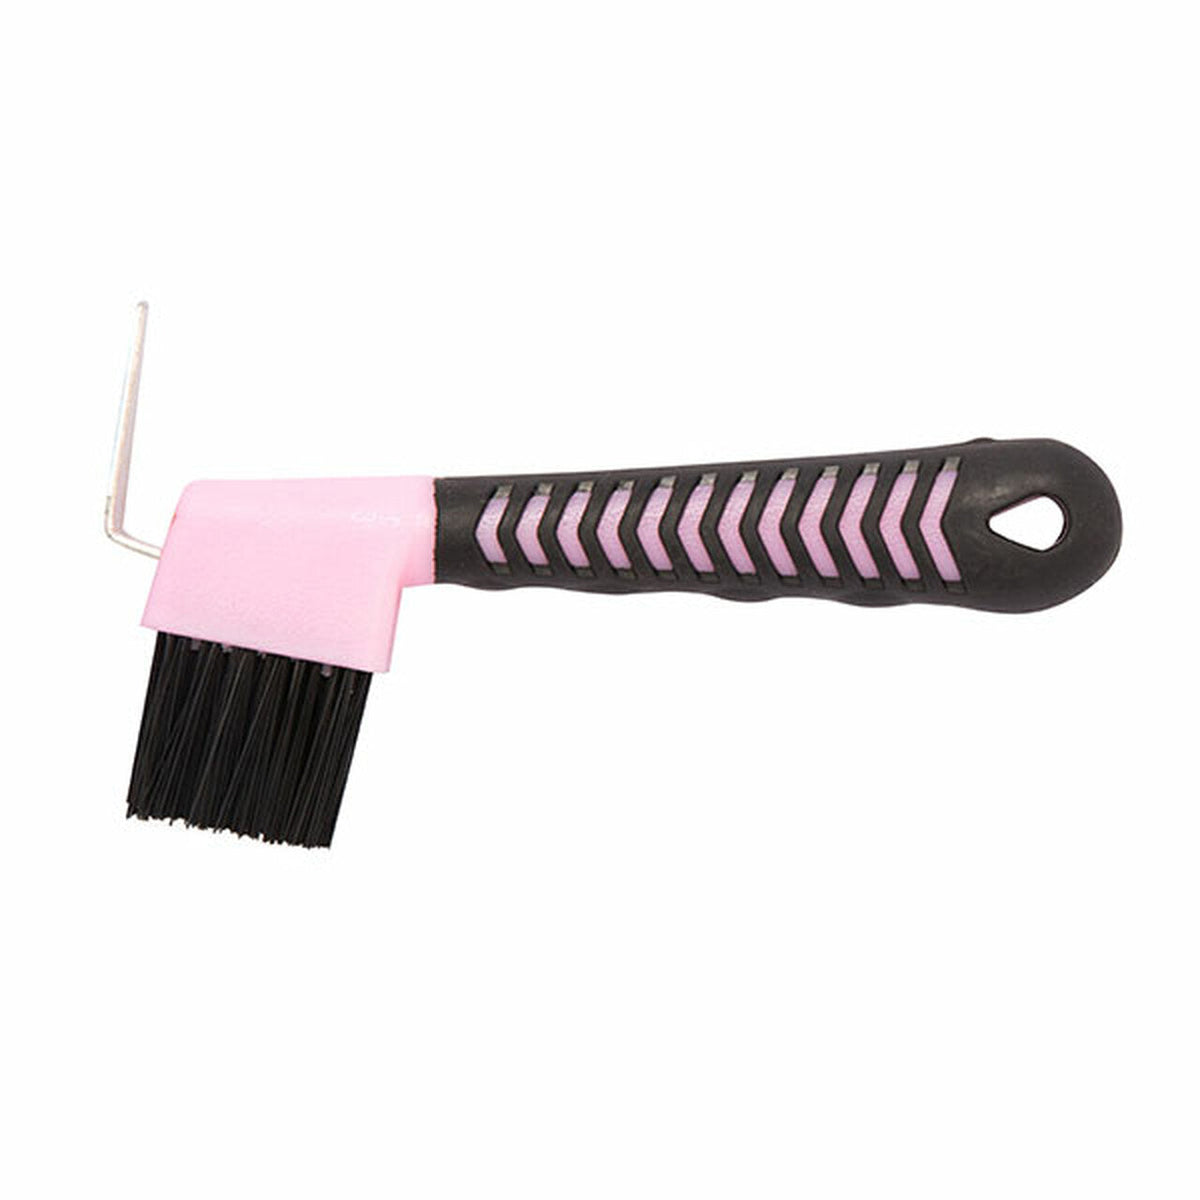 Side view of pink hoof pick with black shaped handle and bristles.